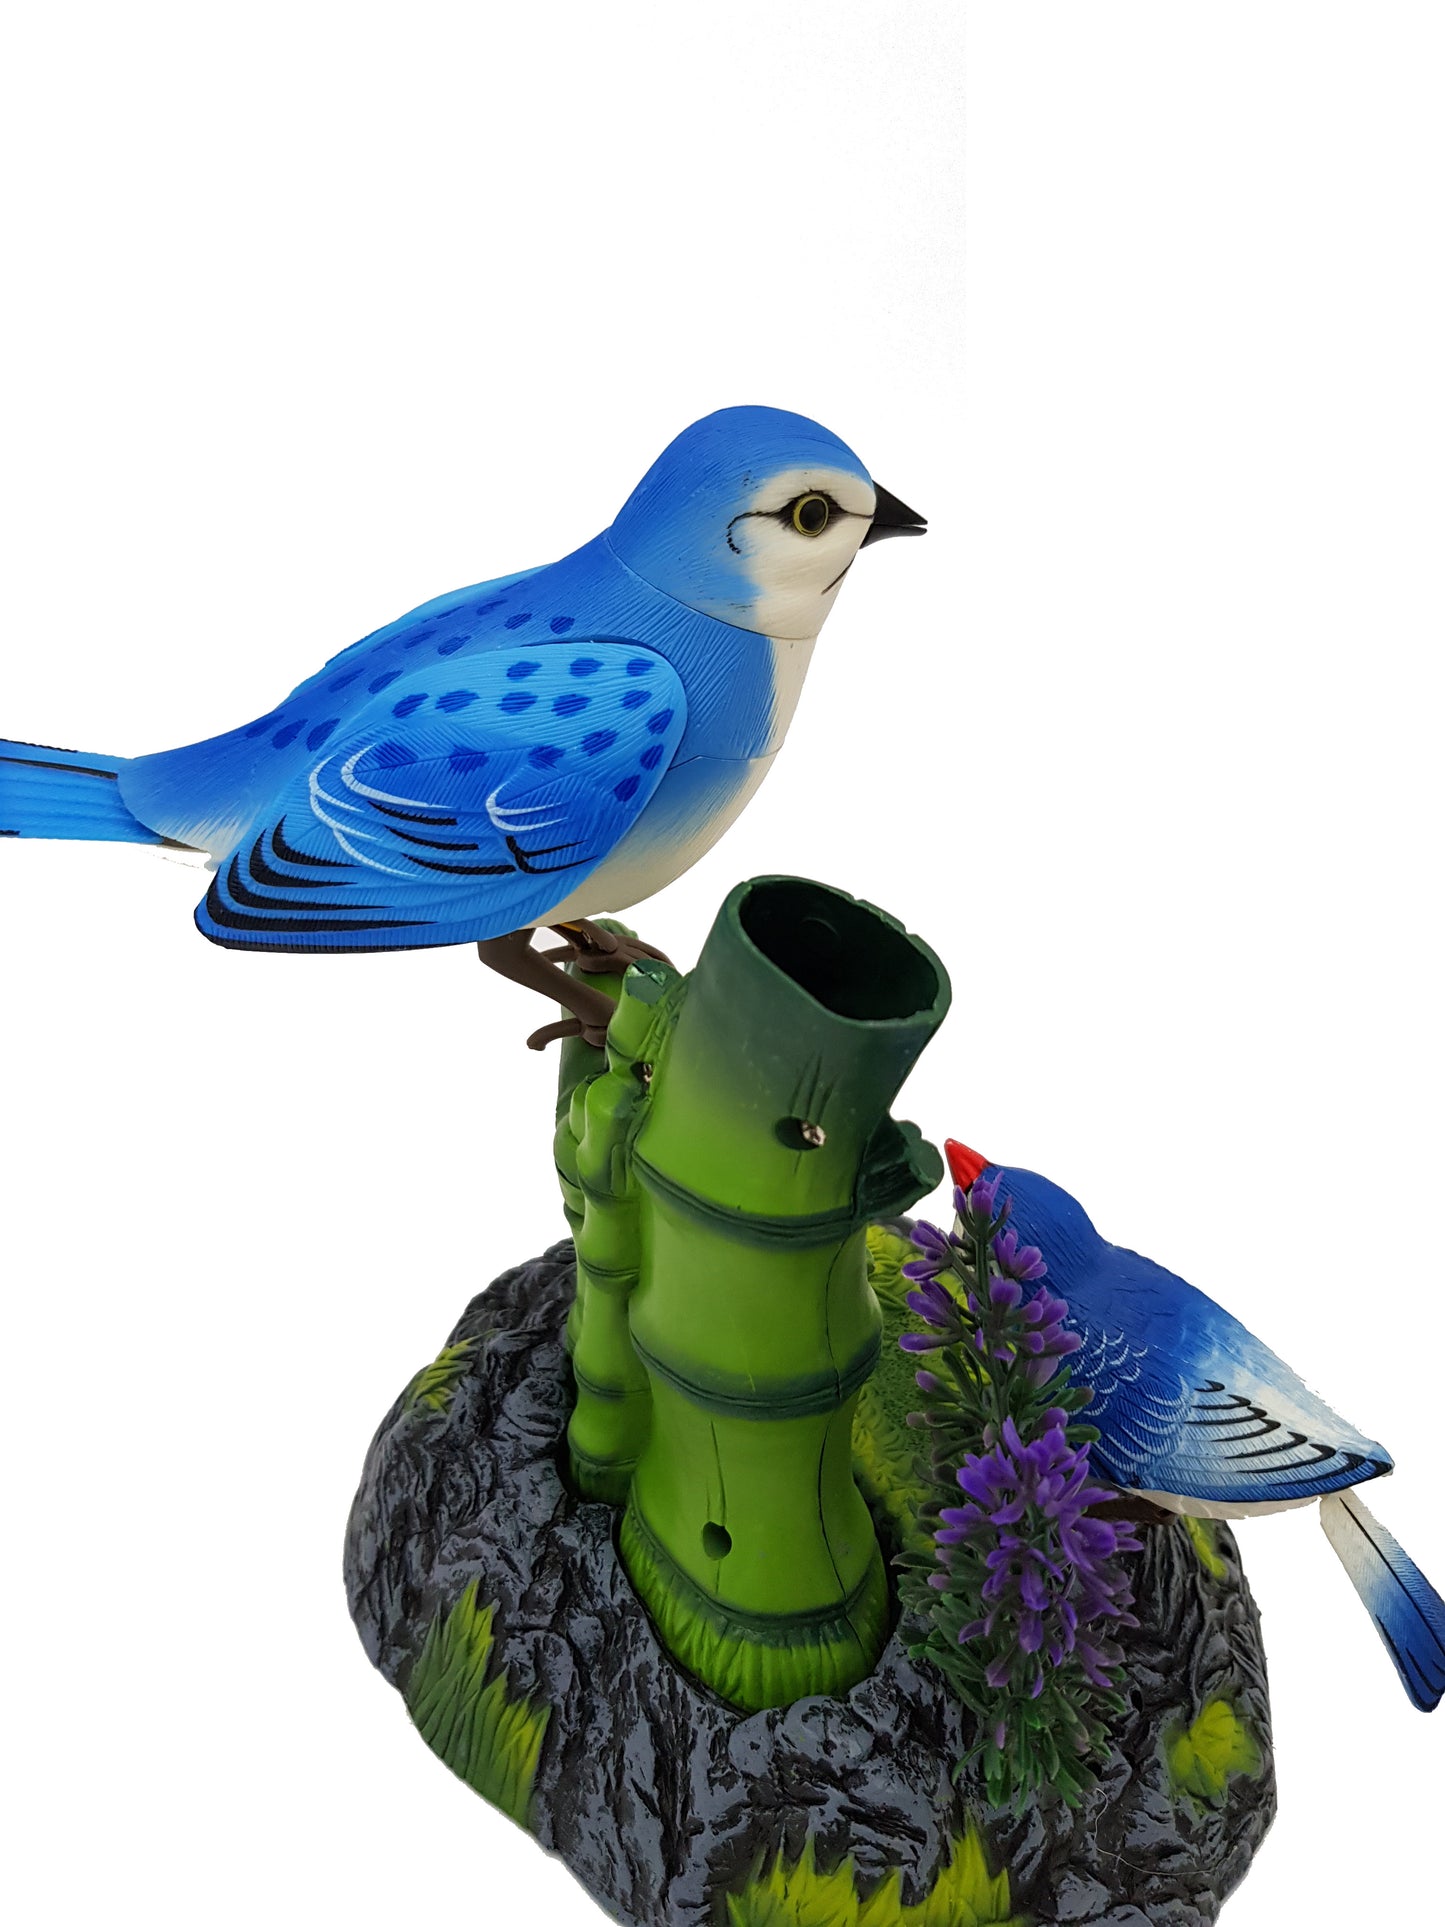 2 Blue Birds Sound and Touch Control Function Singing Bird Electric Bird Pets Pen Pencil Holder Christmas Birthday Gift for Kids